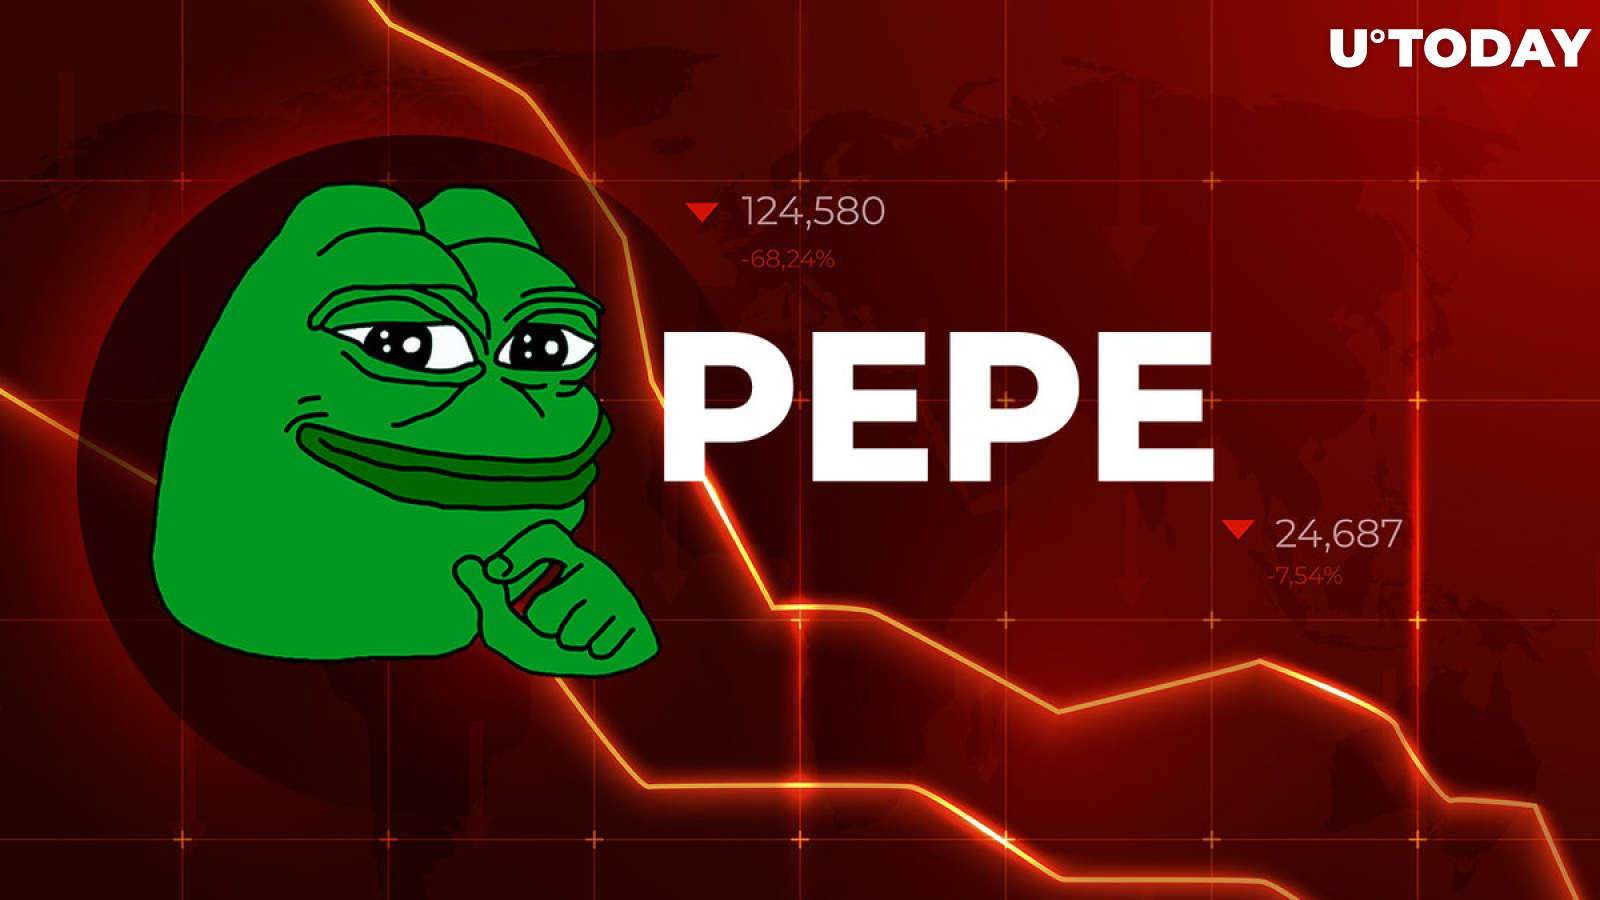 Pepe (PEPE) Responds to Unexpected Transactions That Led to Price Crash